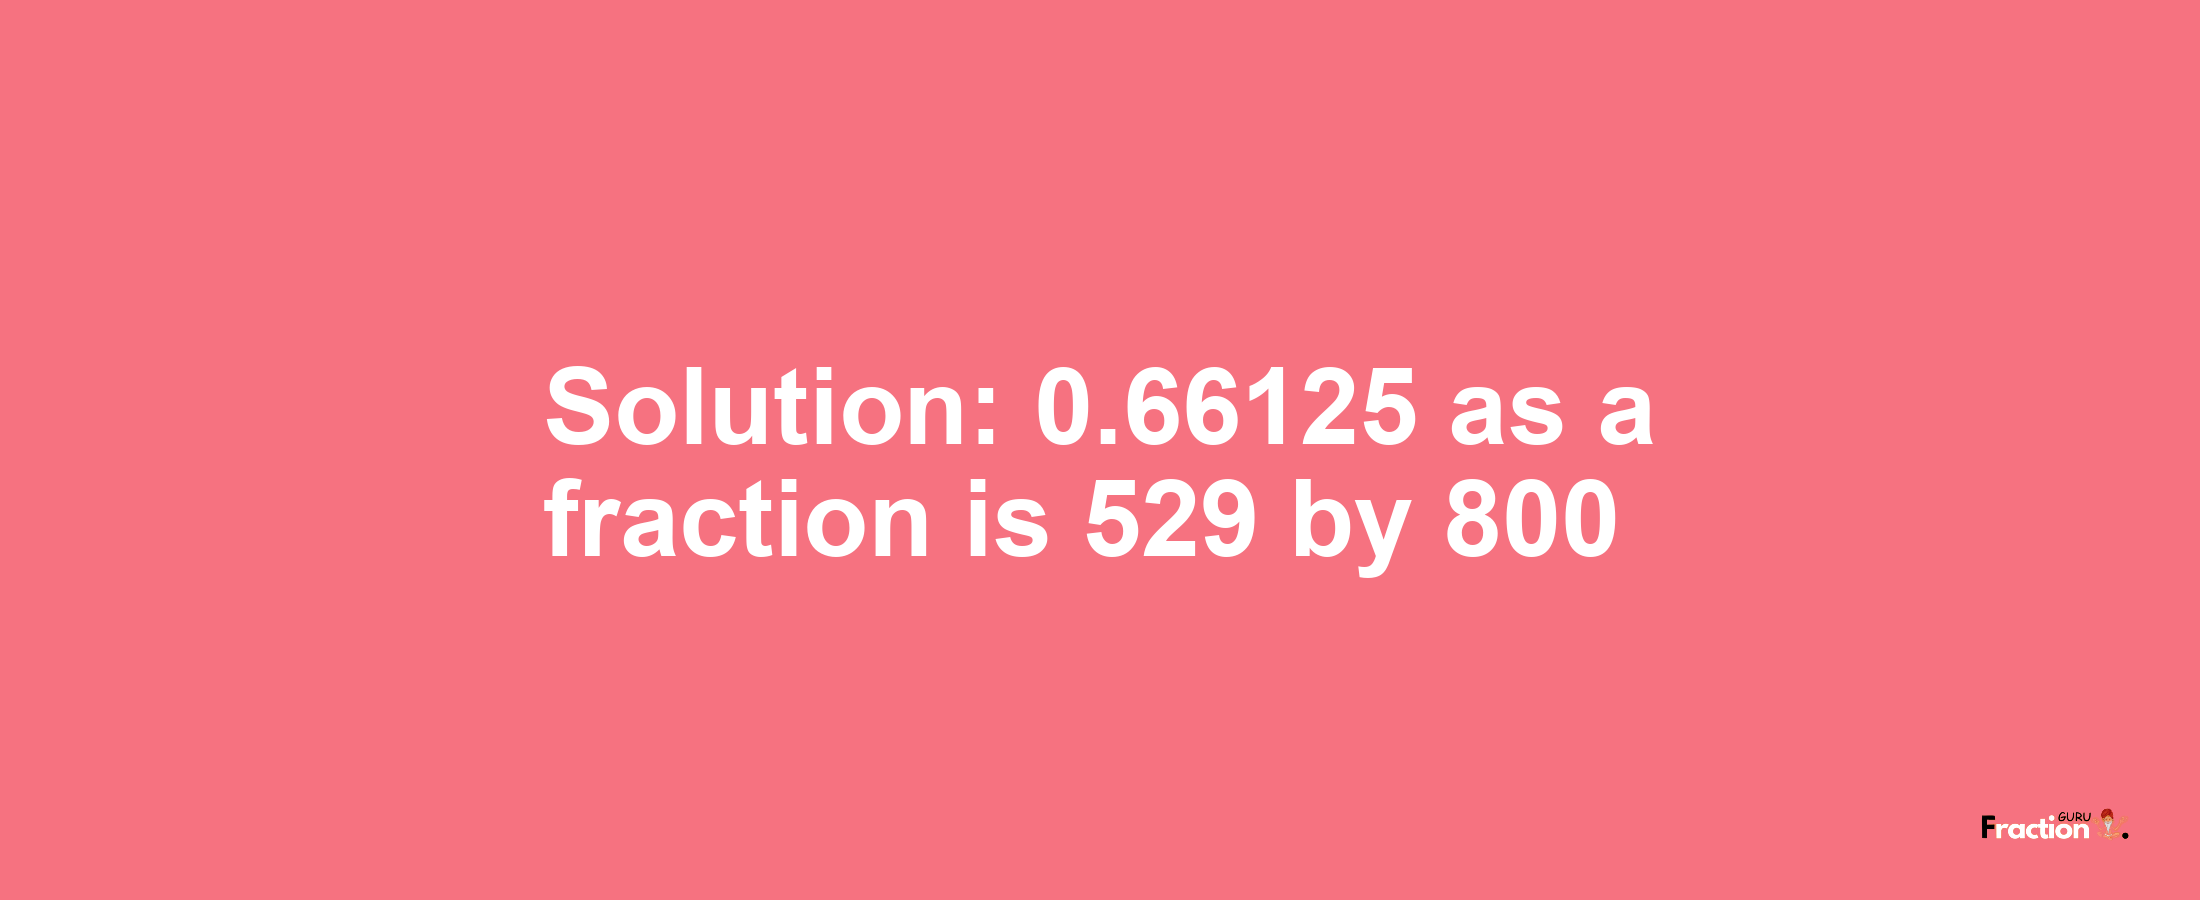 Solution:0.66125 as a fraction is 529/800